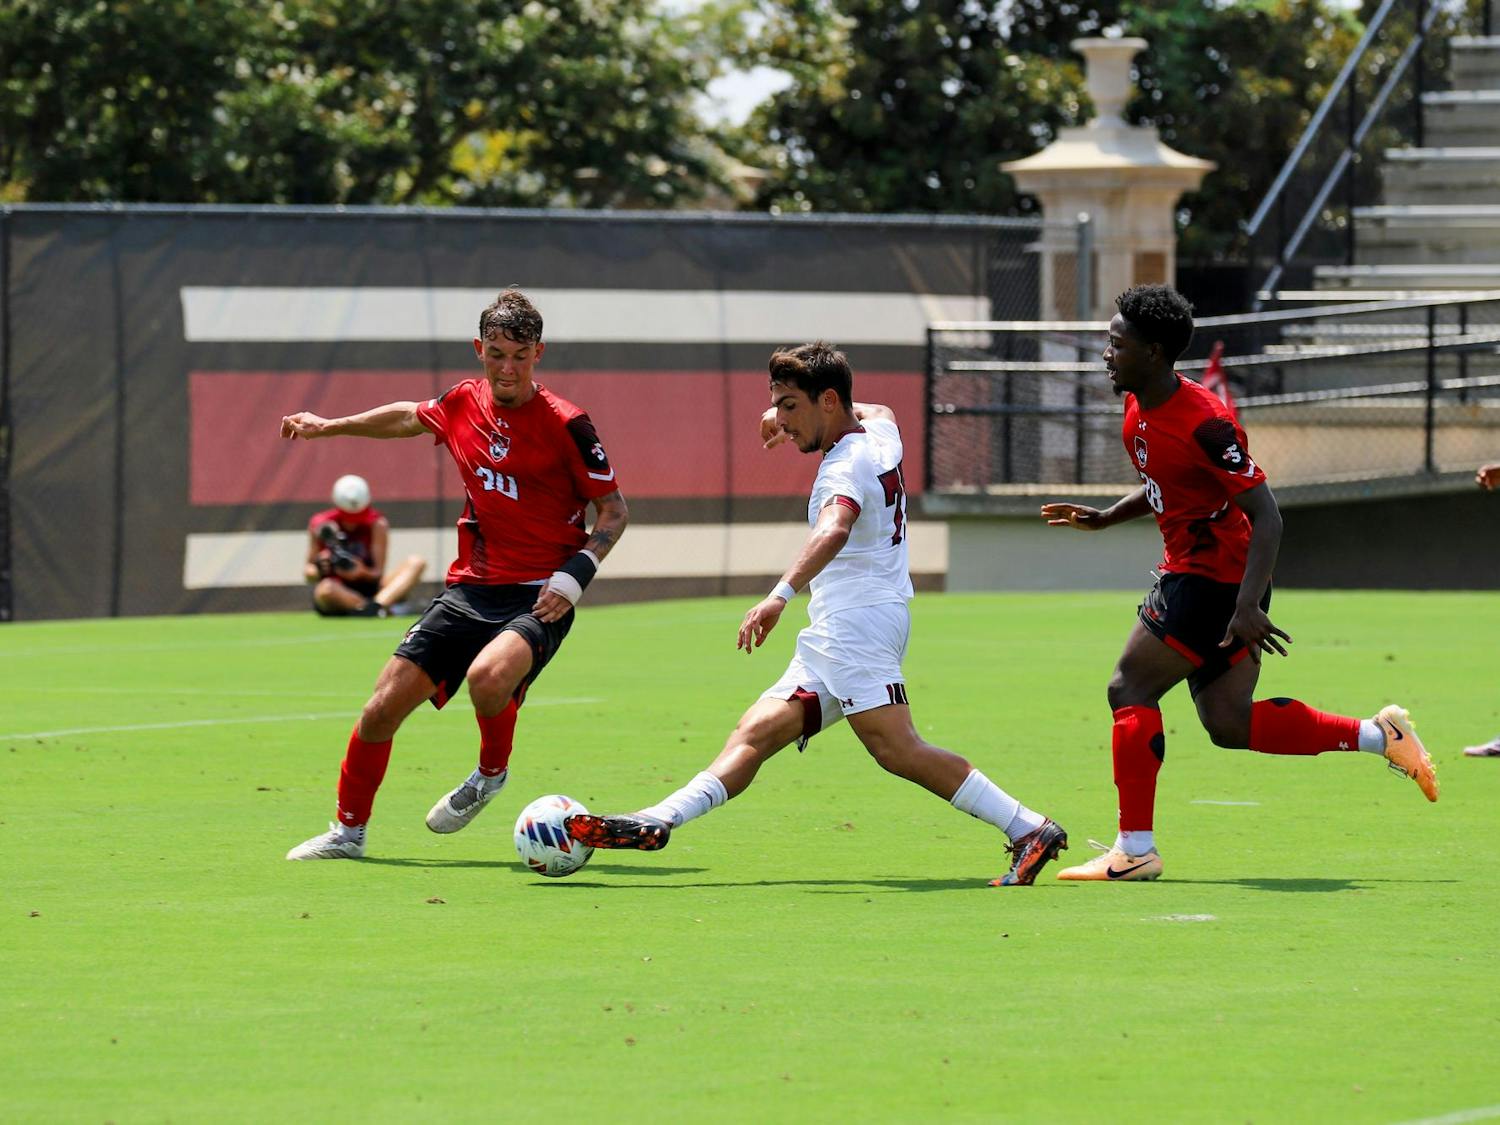 Freshman midfielder Pantelis Gavriel passes the ball to one of his teammates as he gets double-teamed close to Gardner-Webb's goal. The Gamecocks fell to the Bulldogs 2-0 in its first home game of the season.